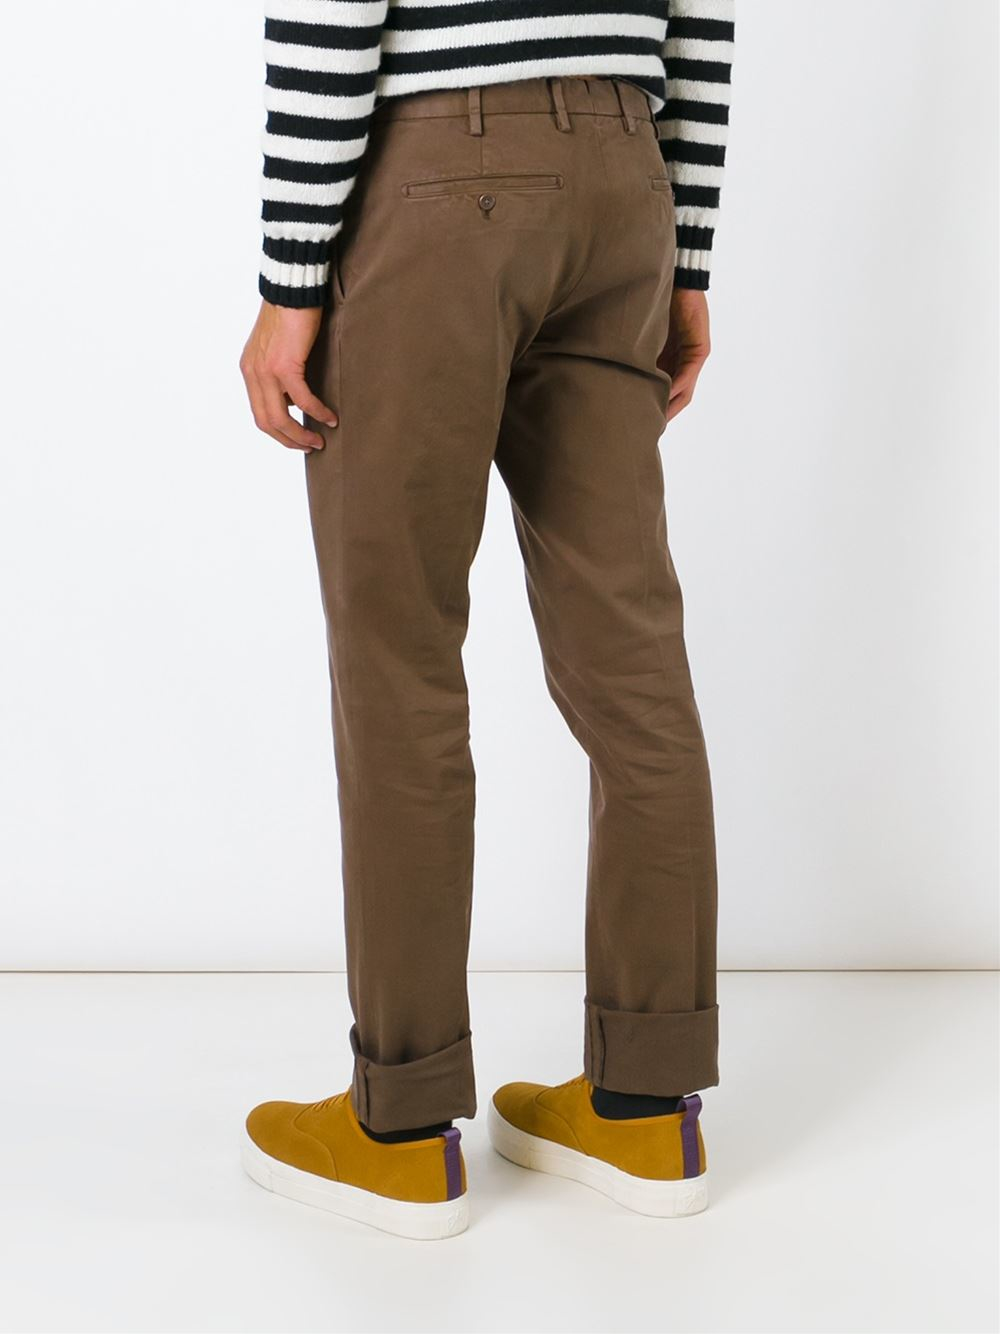 Lyst - Incotex Chino Trousers in Brown for Men